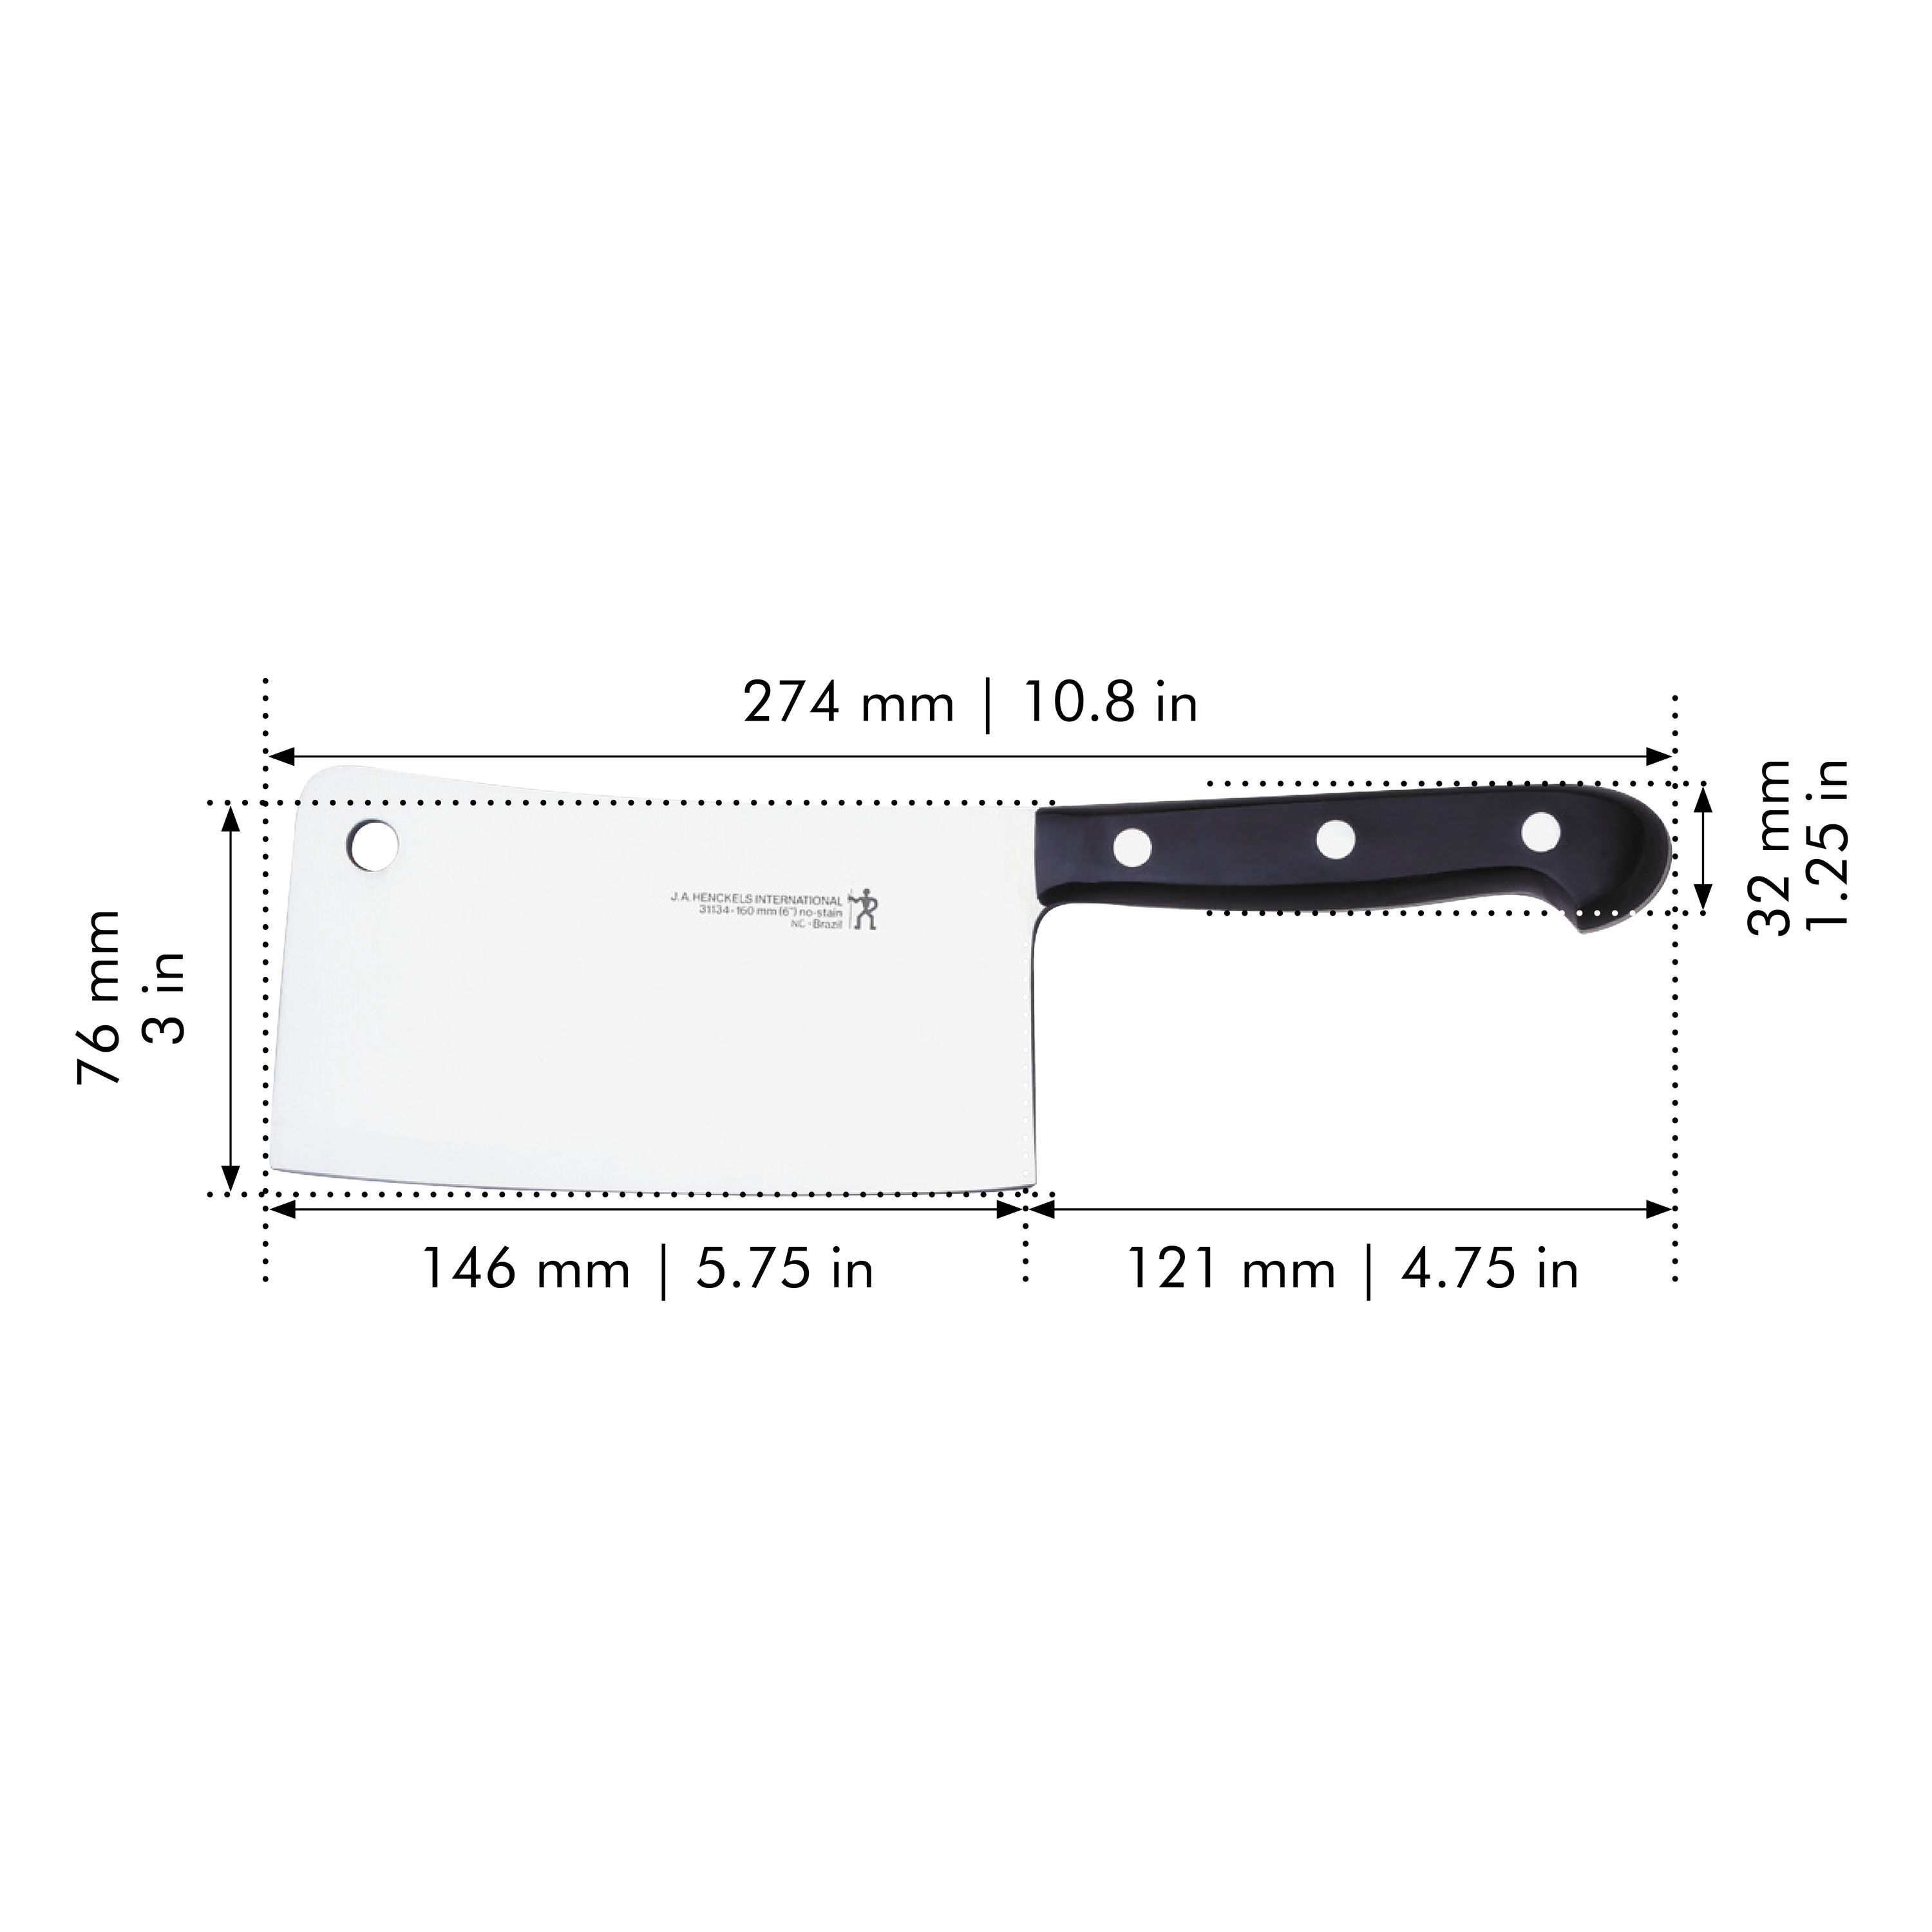 Henckels Classic 6-Inch, Meat Cleaver